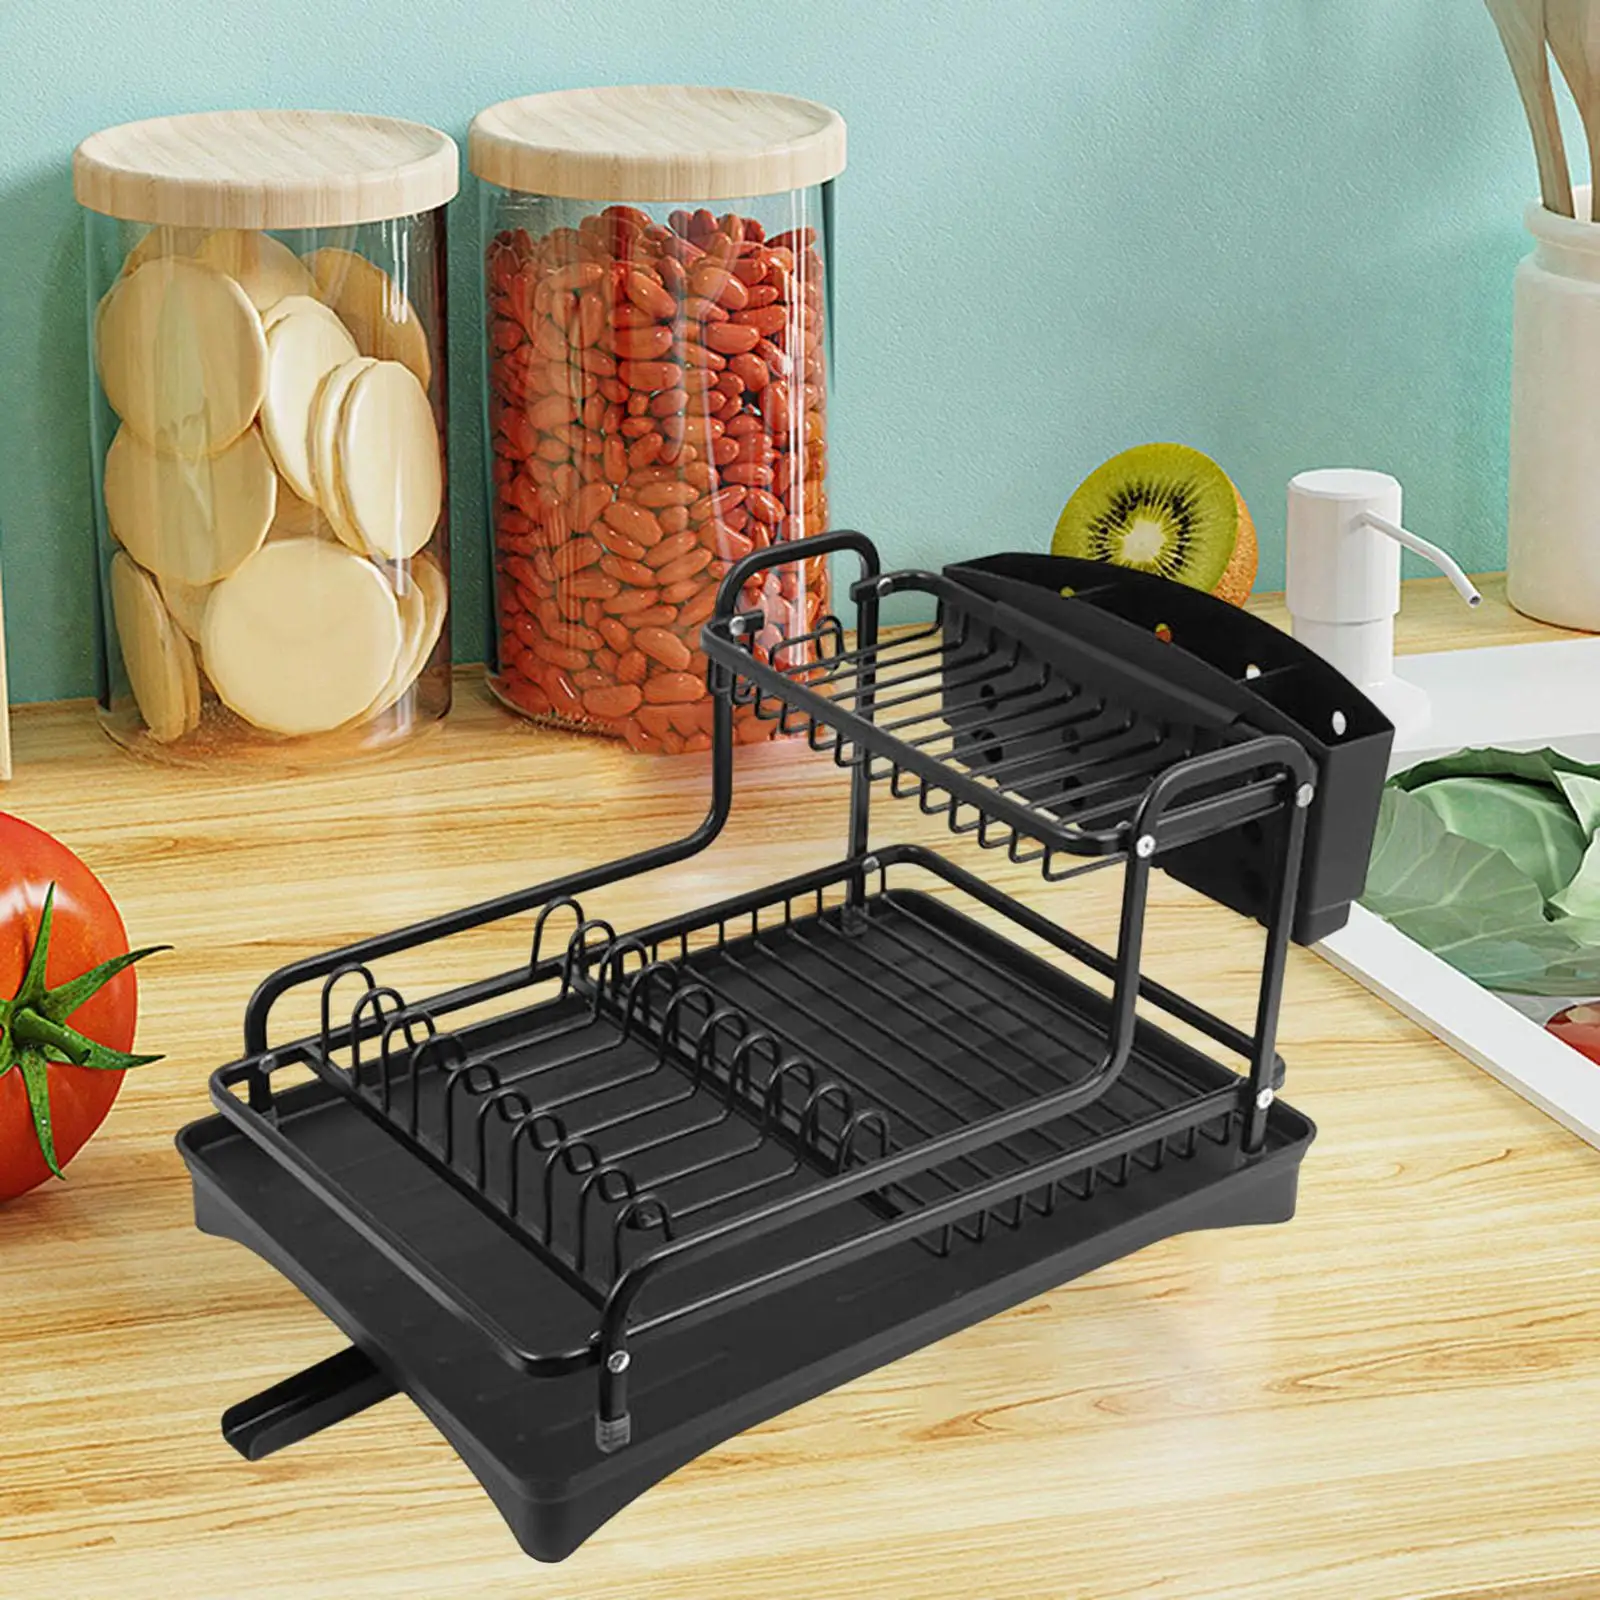 Dish Drying Rack Cutlery Storage Kitchen Drainers Kitchen Accessories Cleaning Brush Holder Dish Drainer for Countertop Kitchen